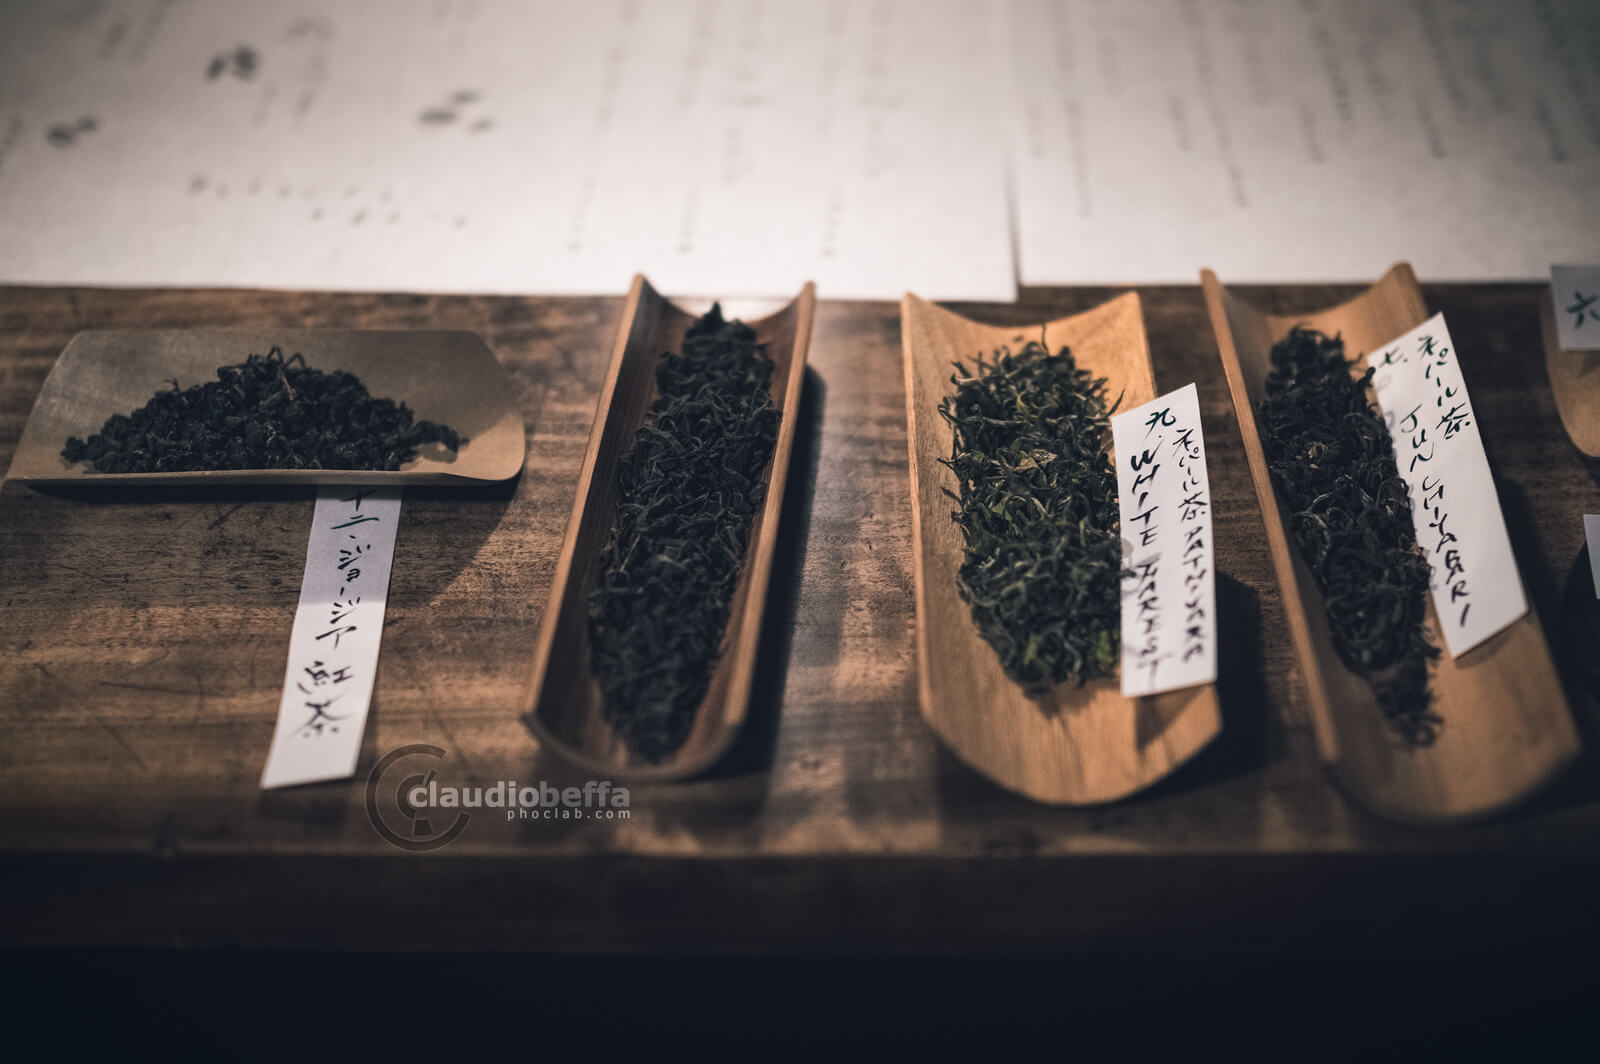 Selection of high grade teas from different countries, Japan, Tradition, Travel.